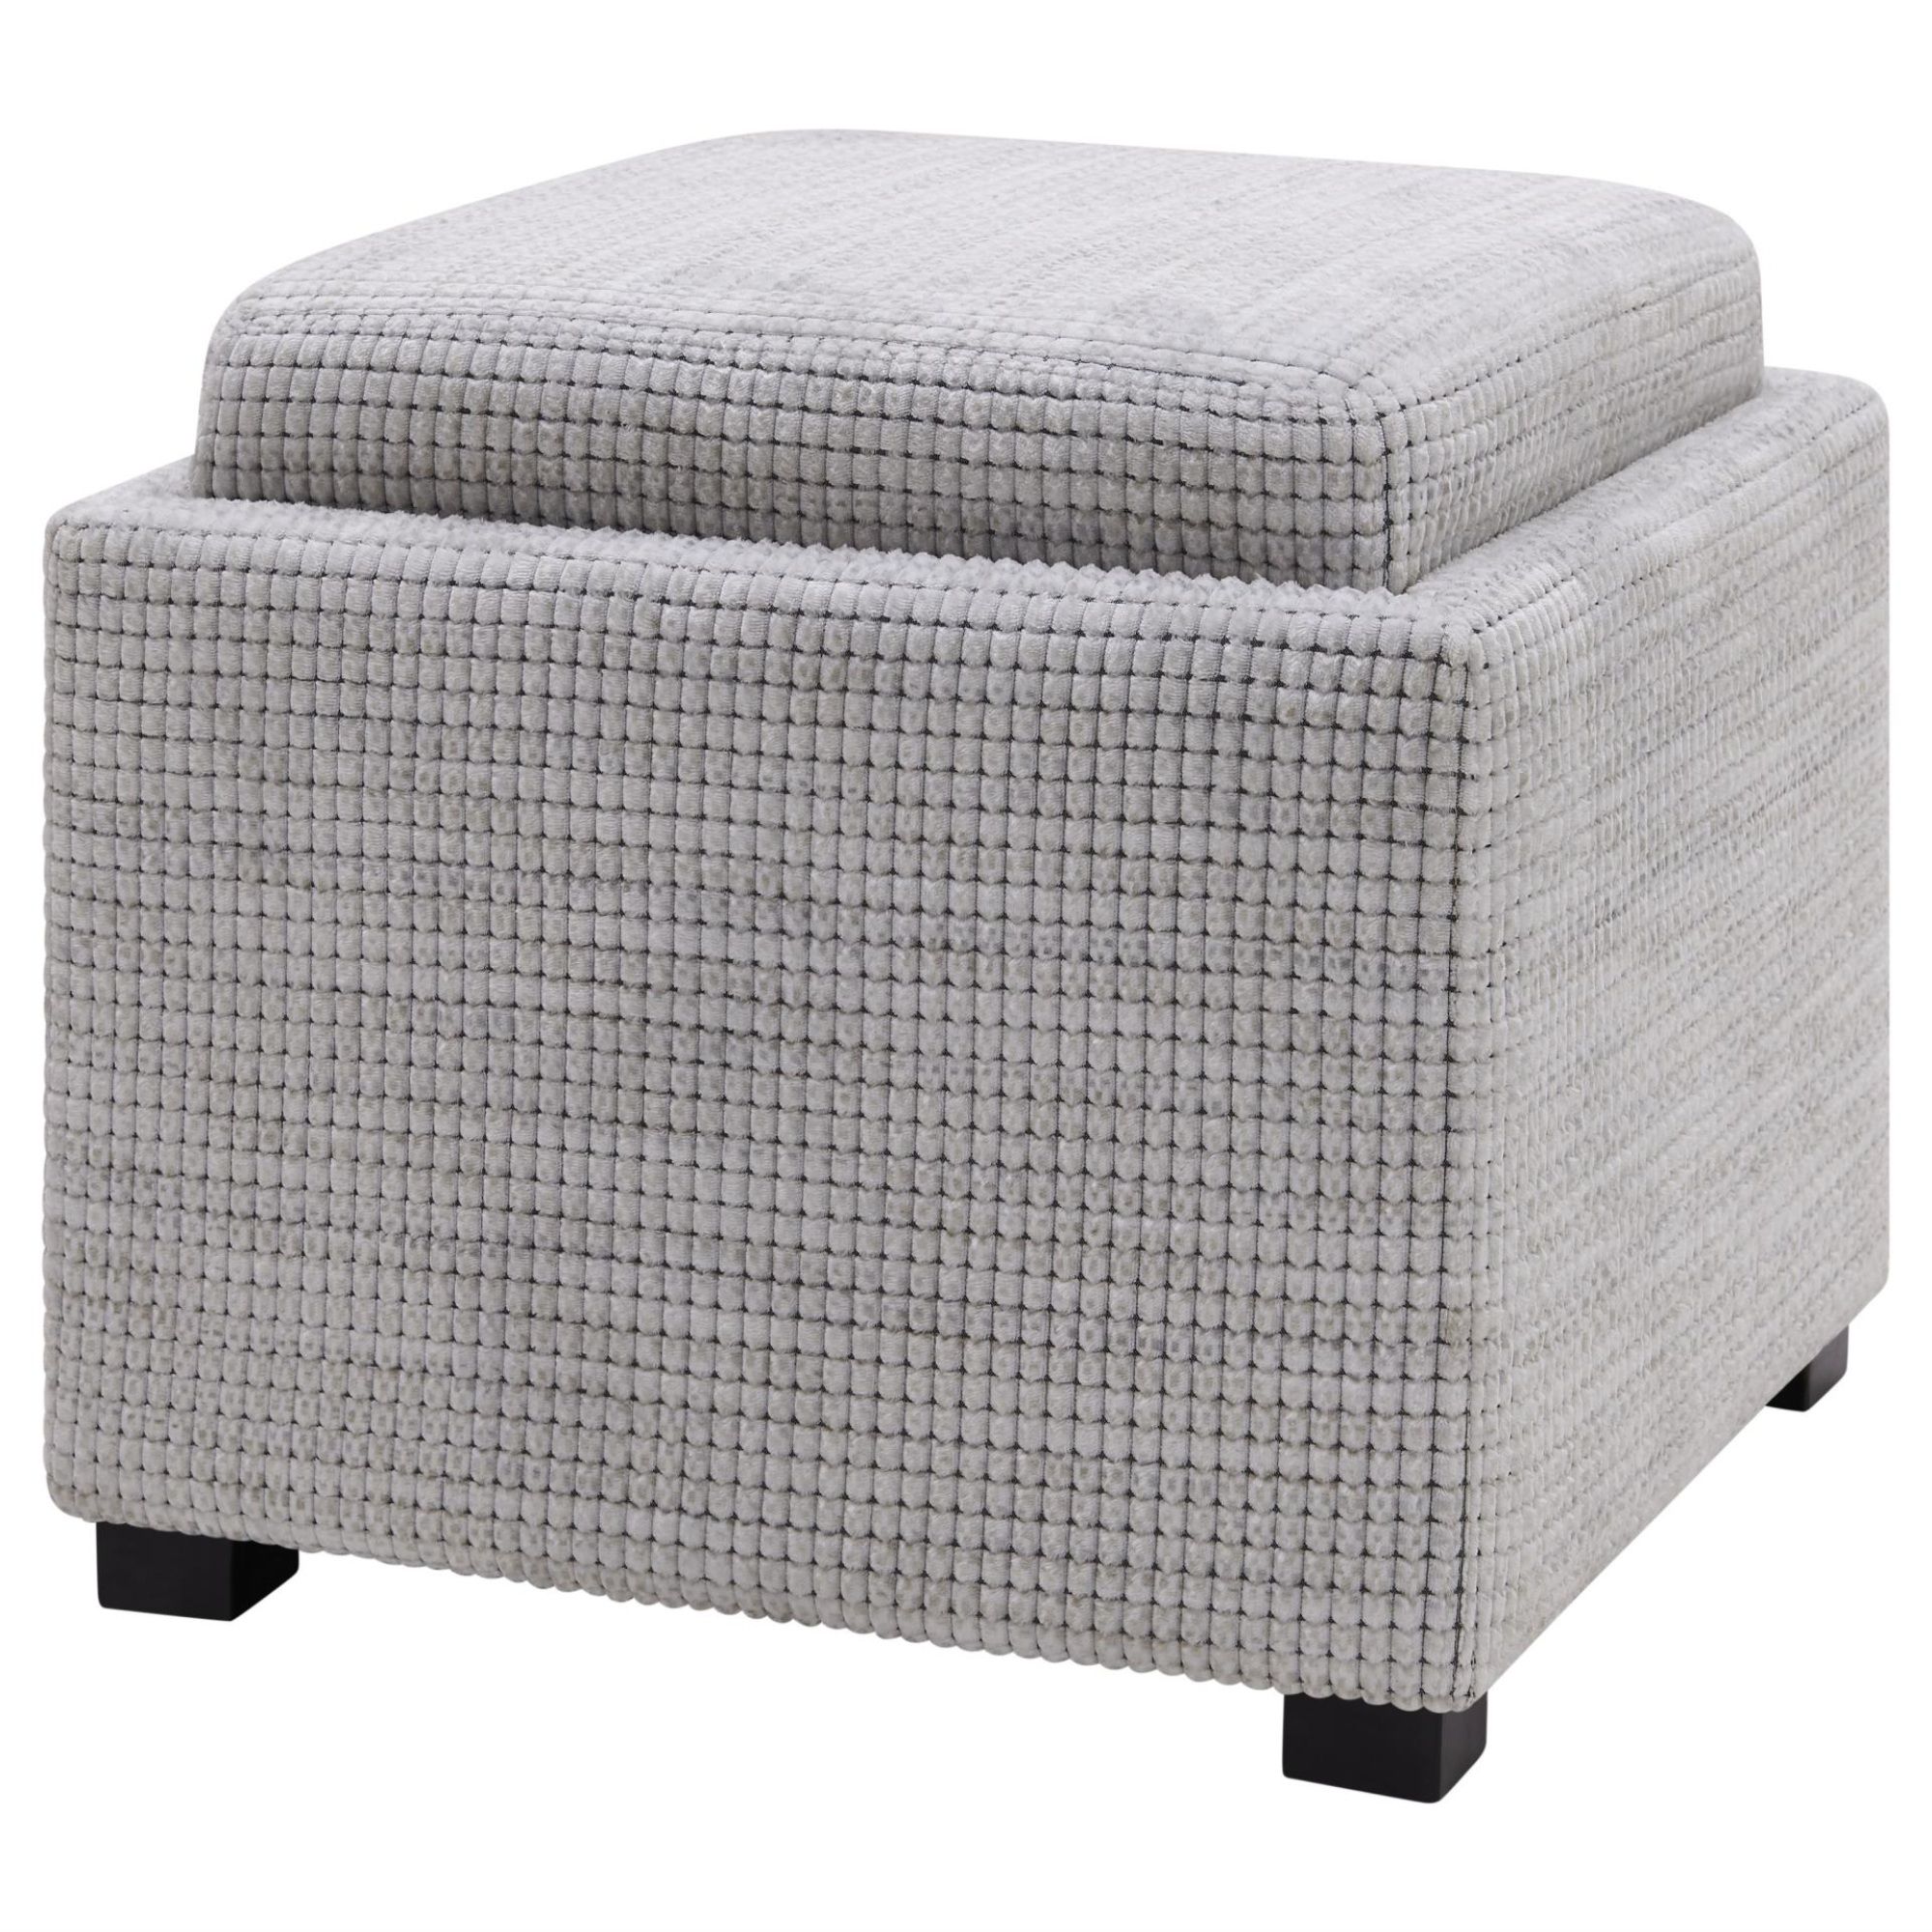 Cameron Square Fabric Storage Ottoman With Tray – Squarespace Gray With Gray Fabric Oval Ottomans (View 18 of 20)